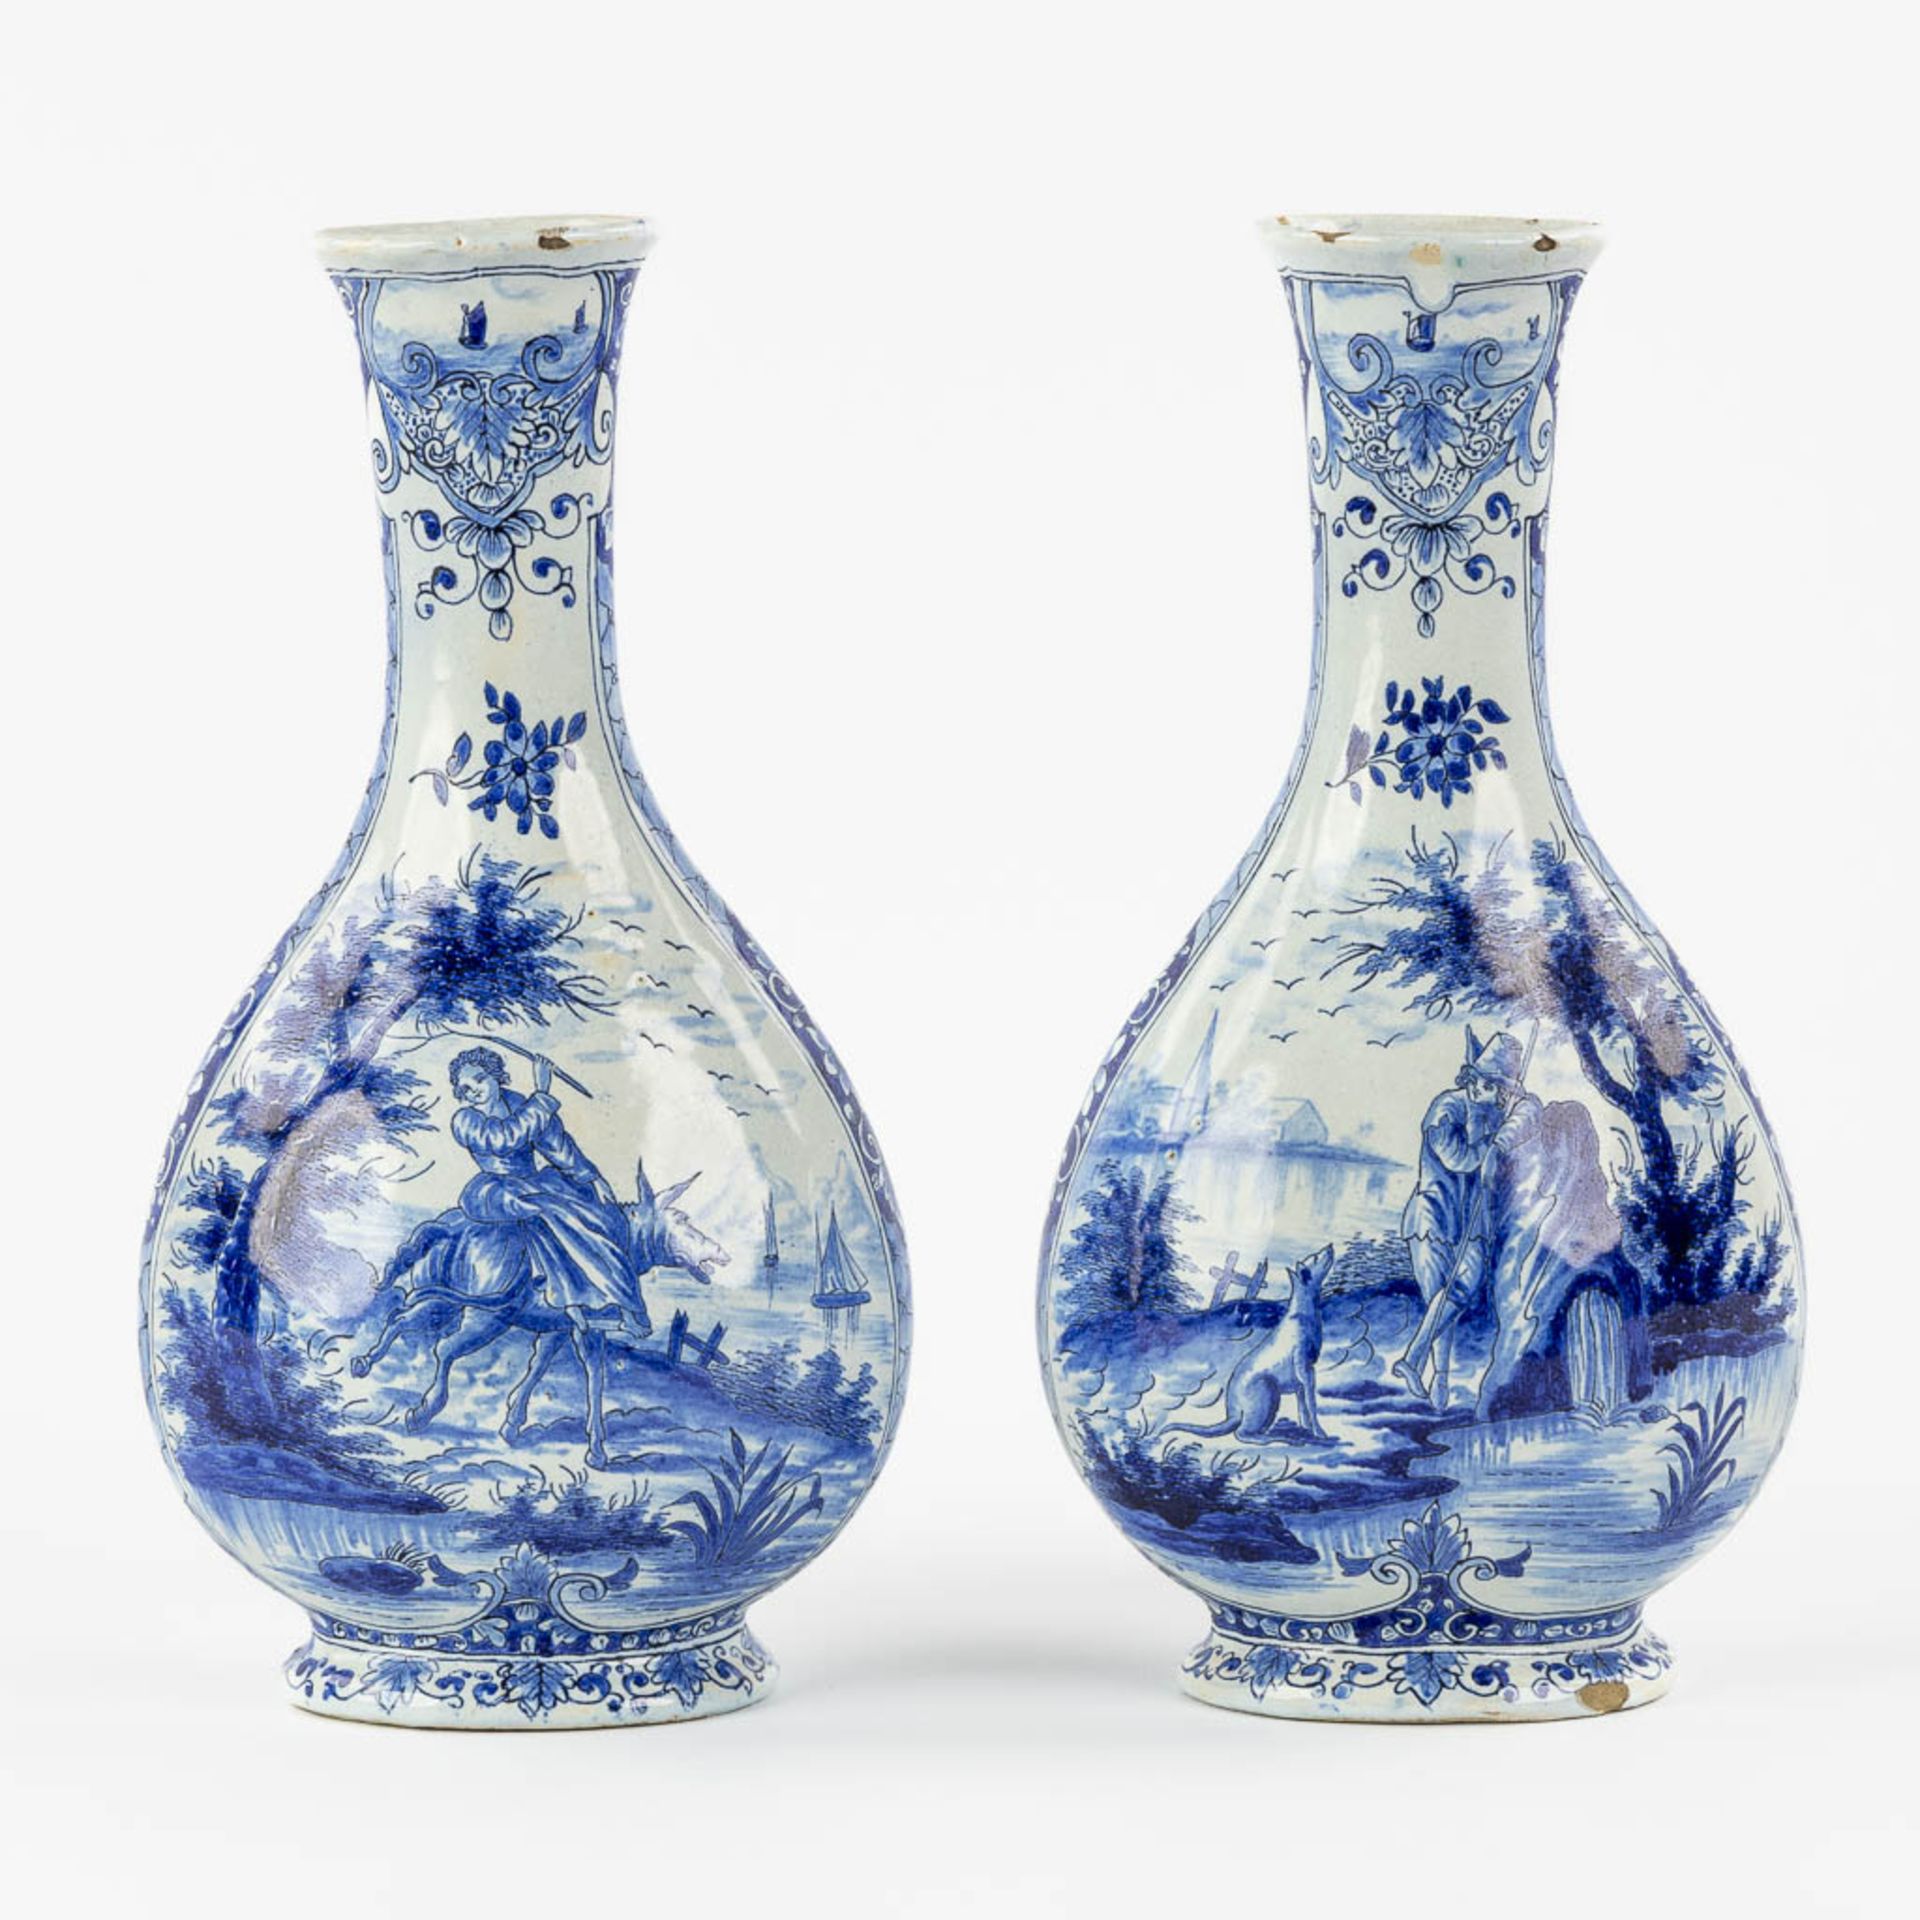 Geertrui Verstelle, Delft, a pair of vases with a landscape decor. Mid 18th C. (L:9 x W:14 x H:26,5 - Image 3 of 15